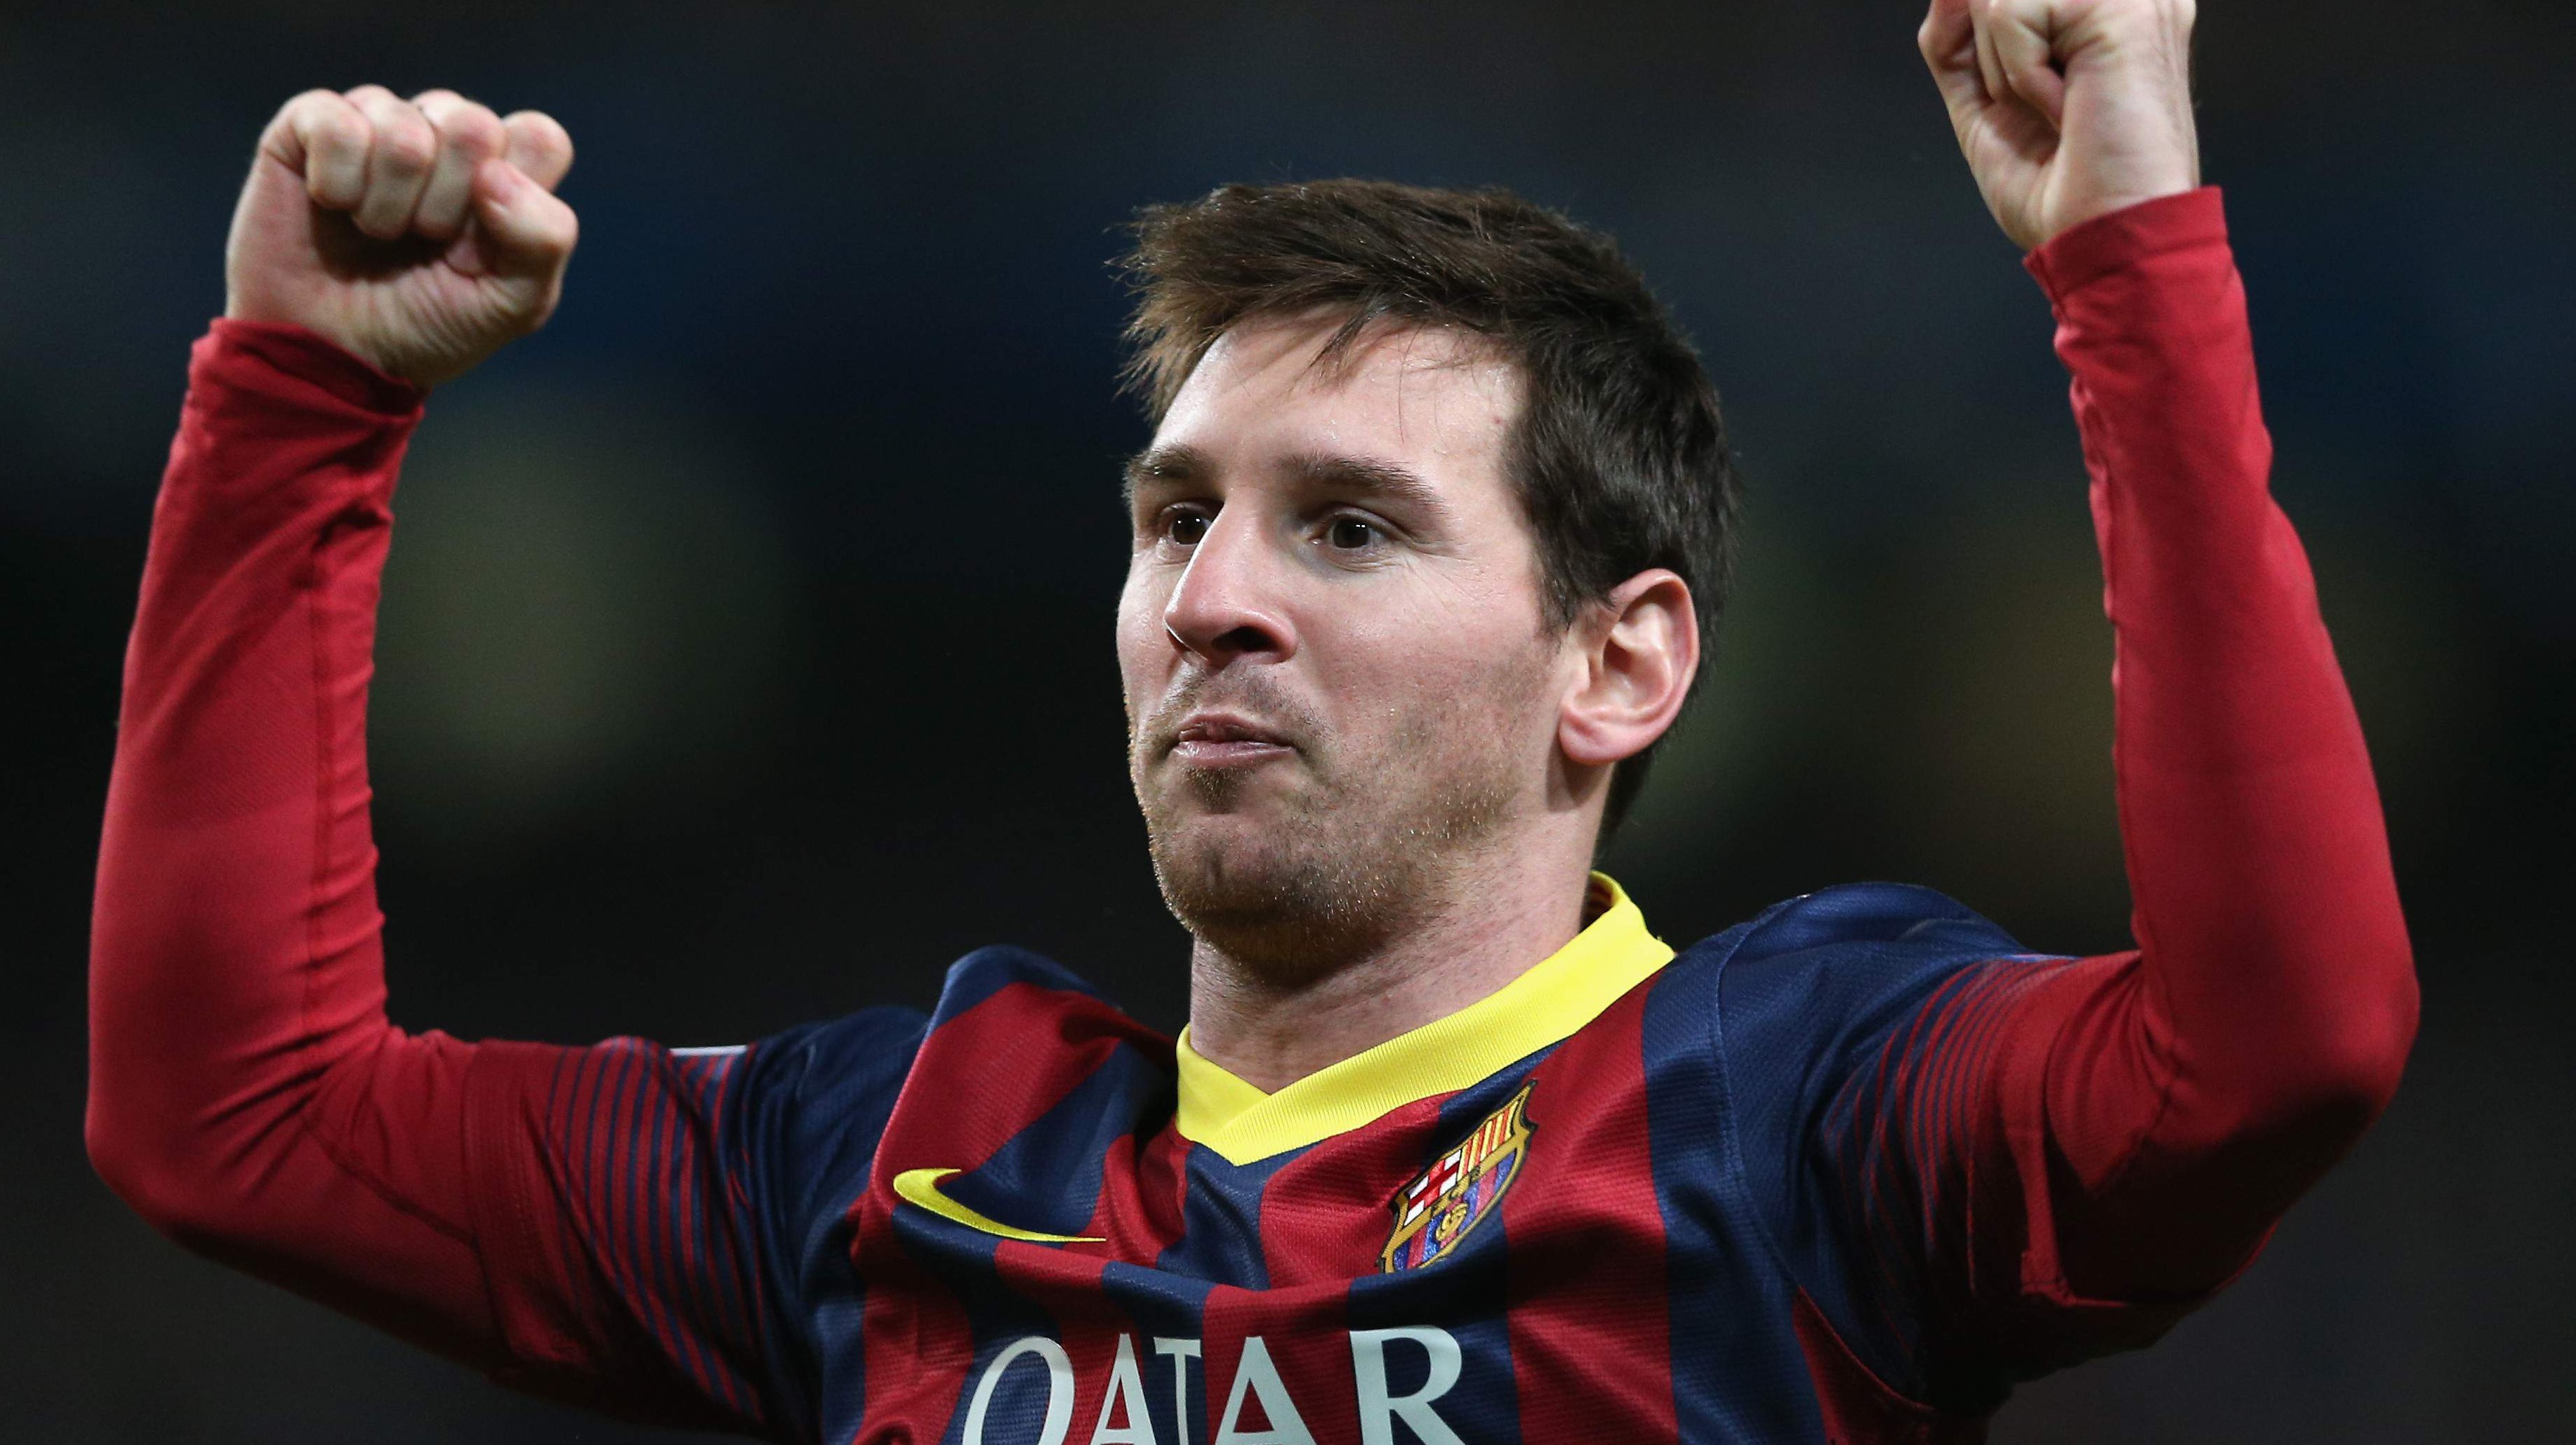 lionel messi biography and net worth